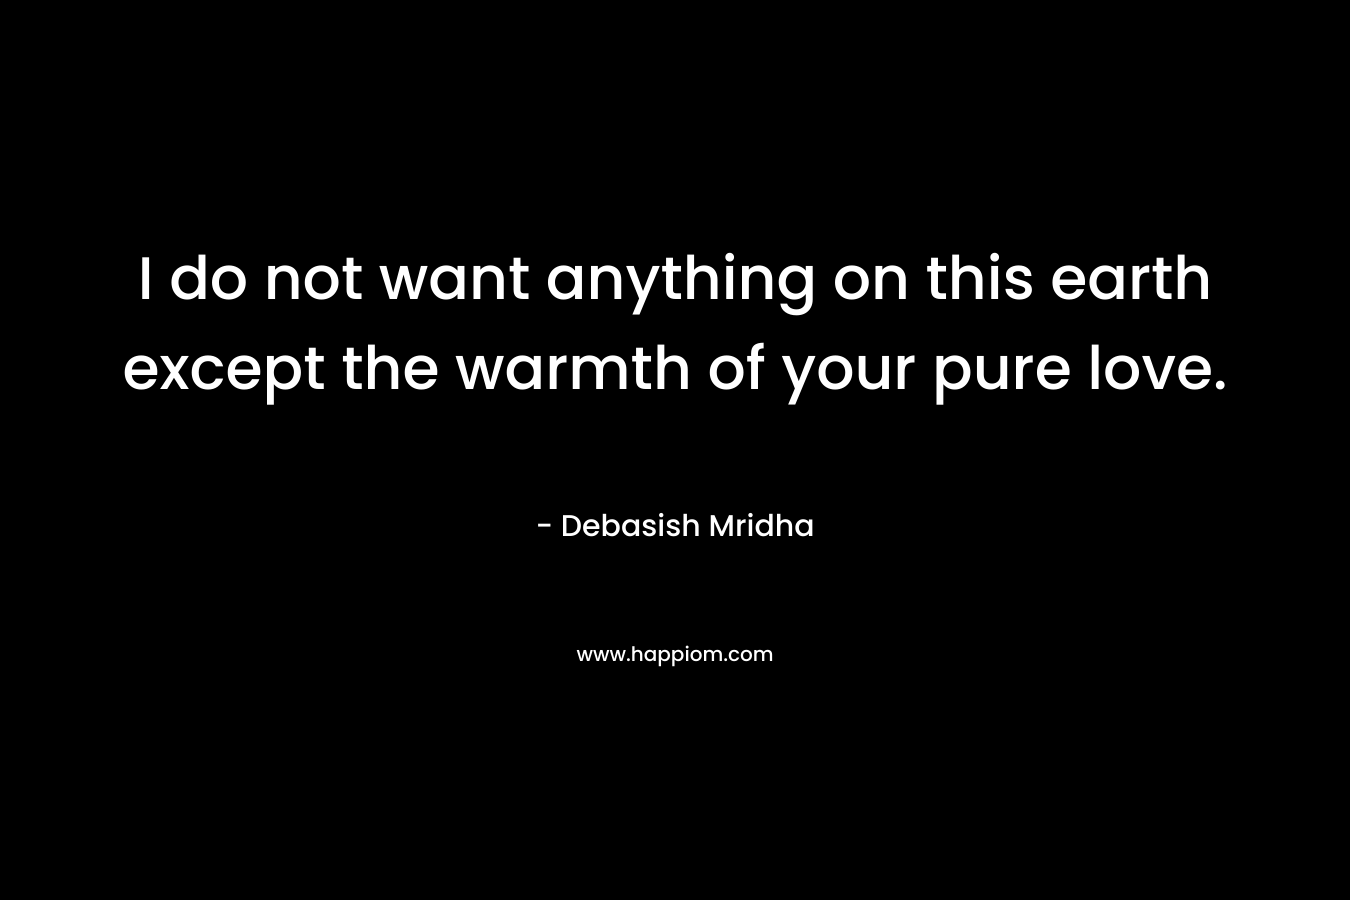 I do not want anything on this earth except the warmth of your pure love.